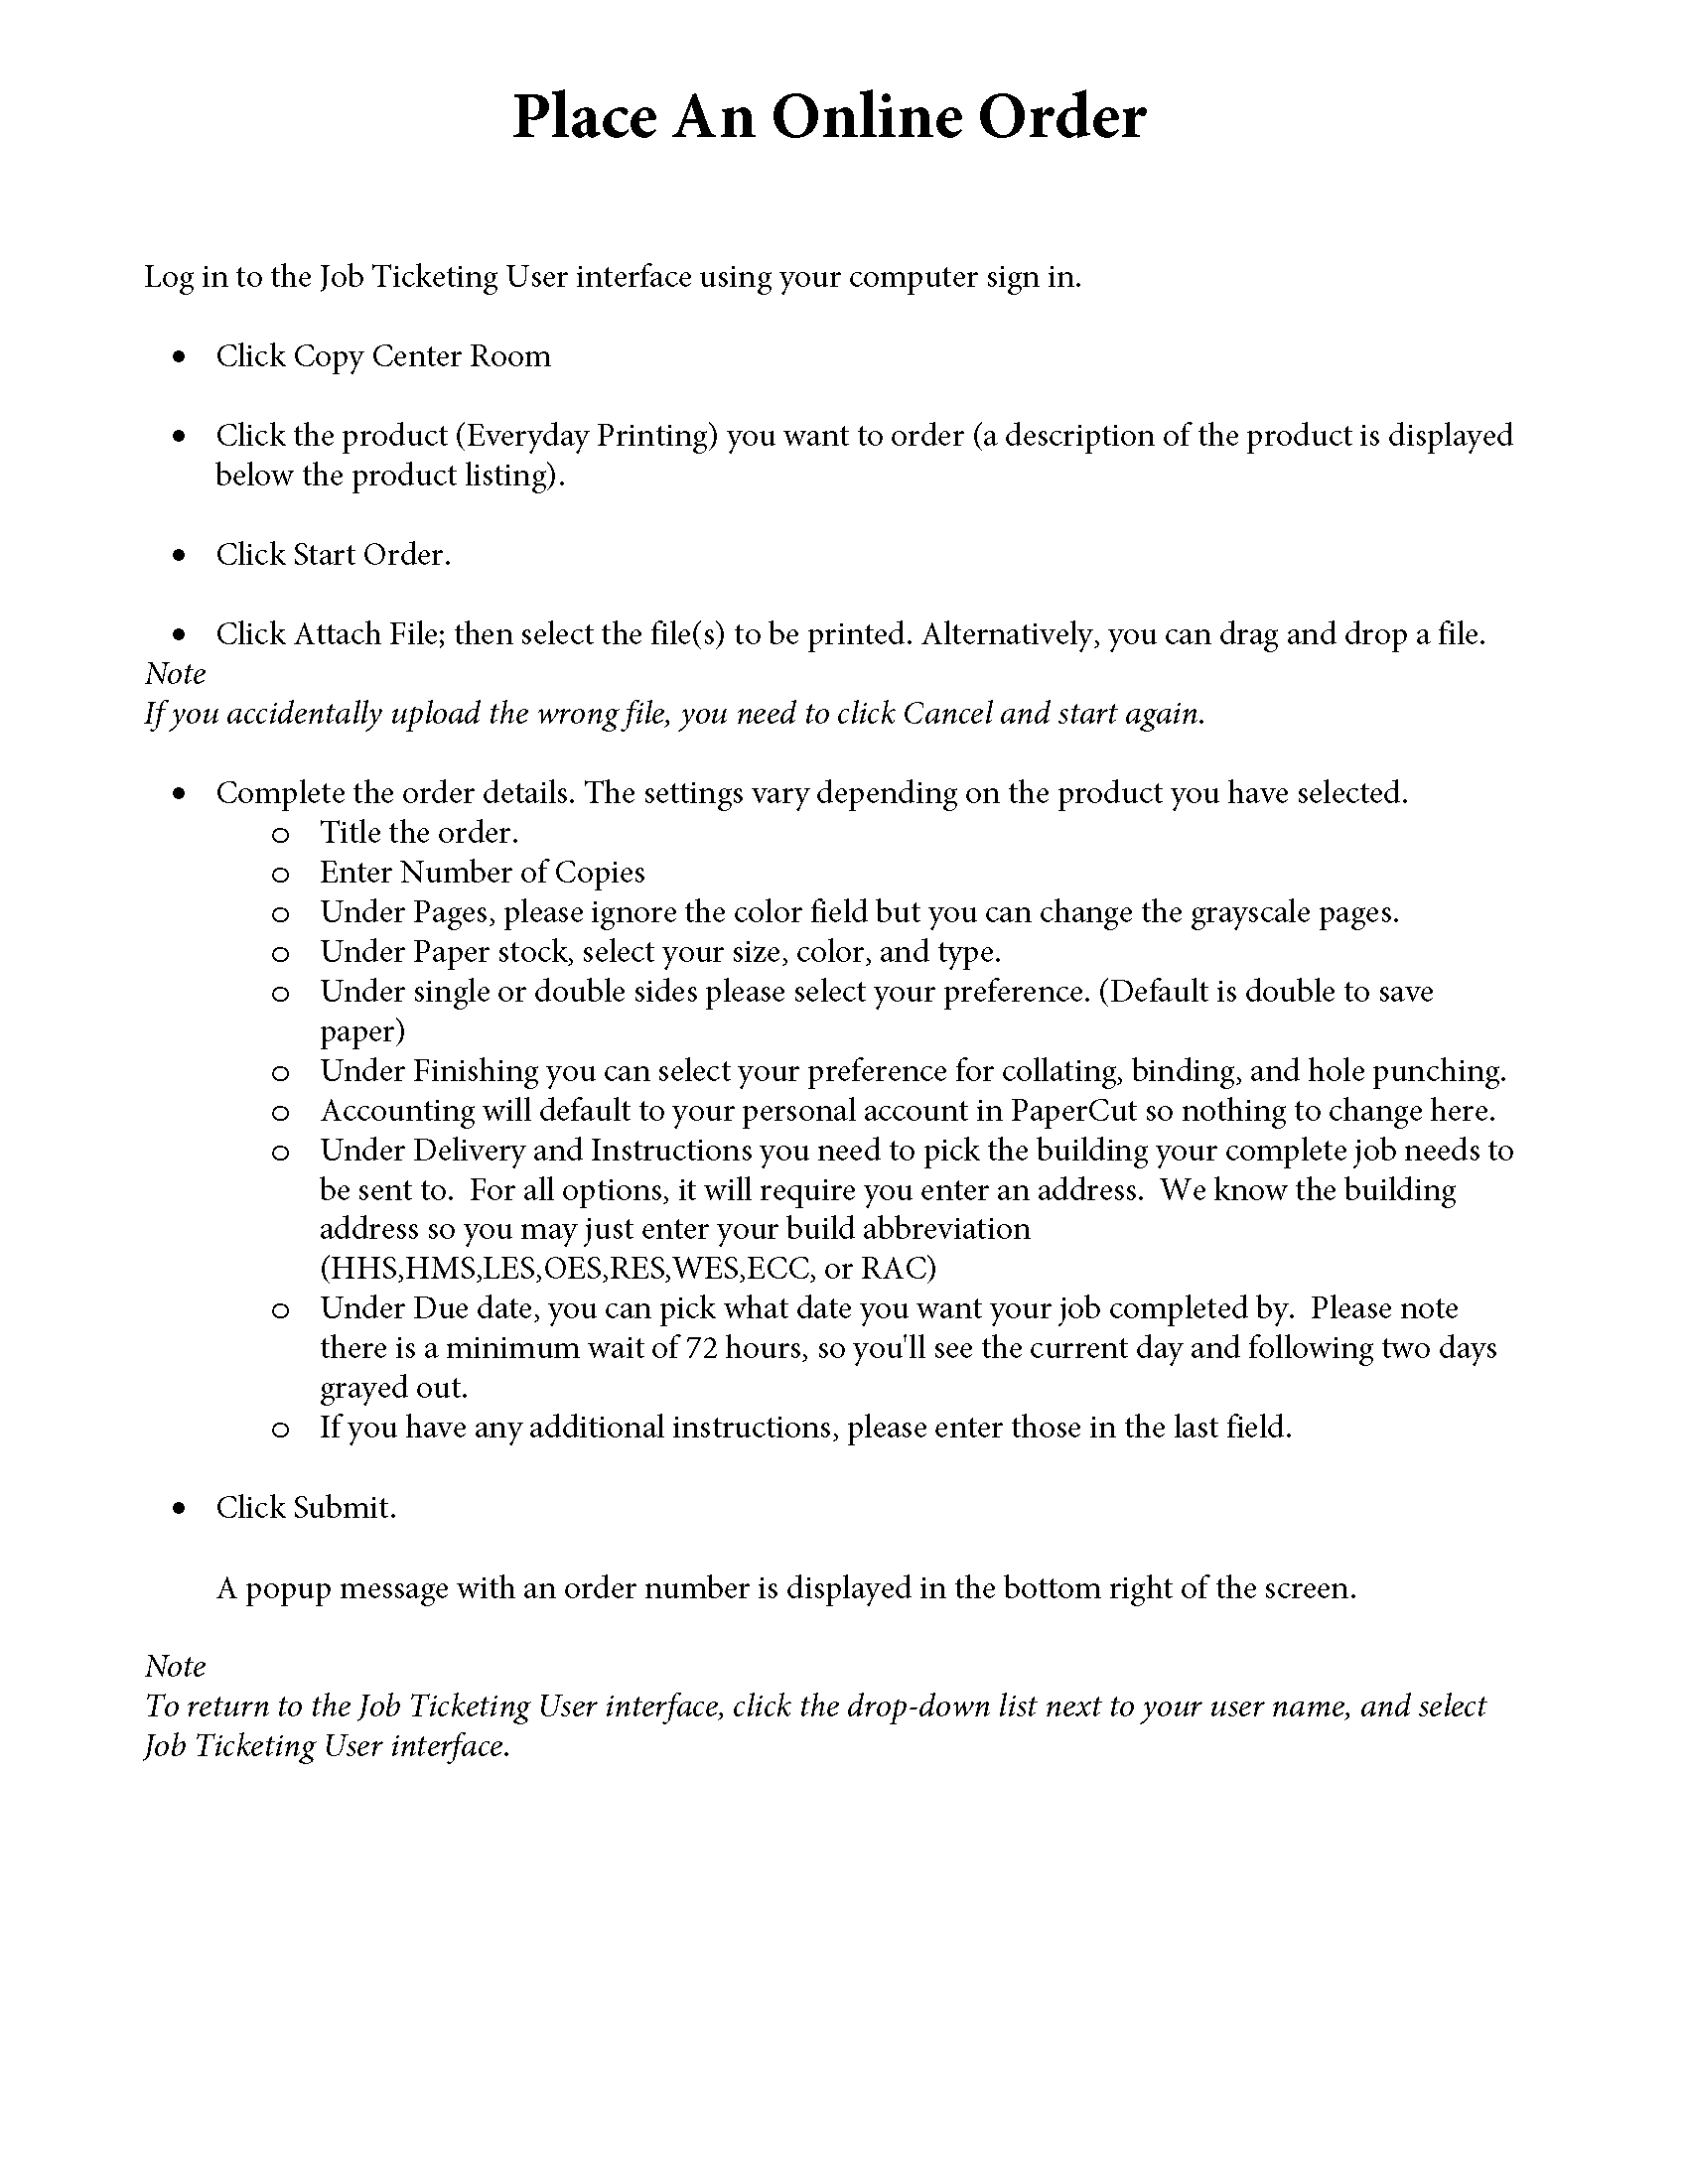 Copy instructions page 2